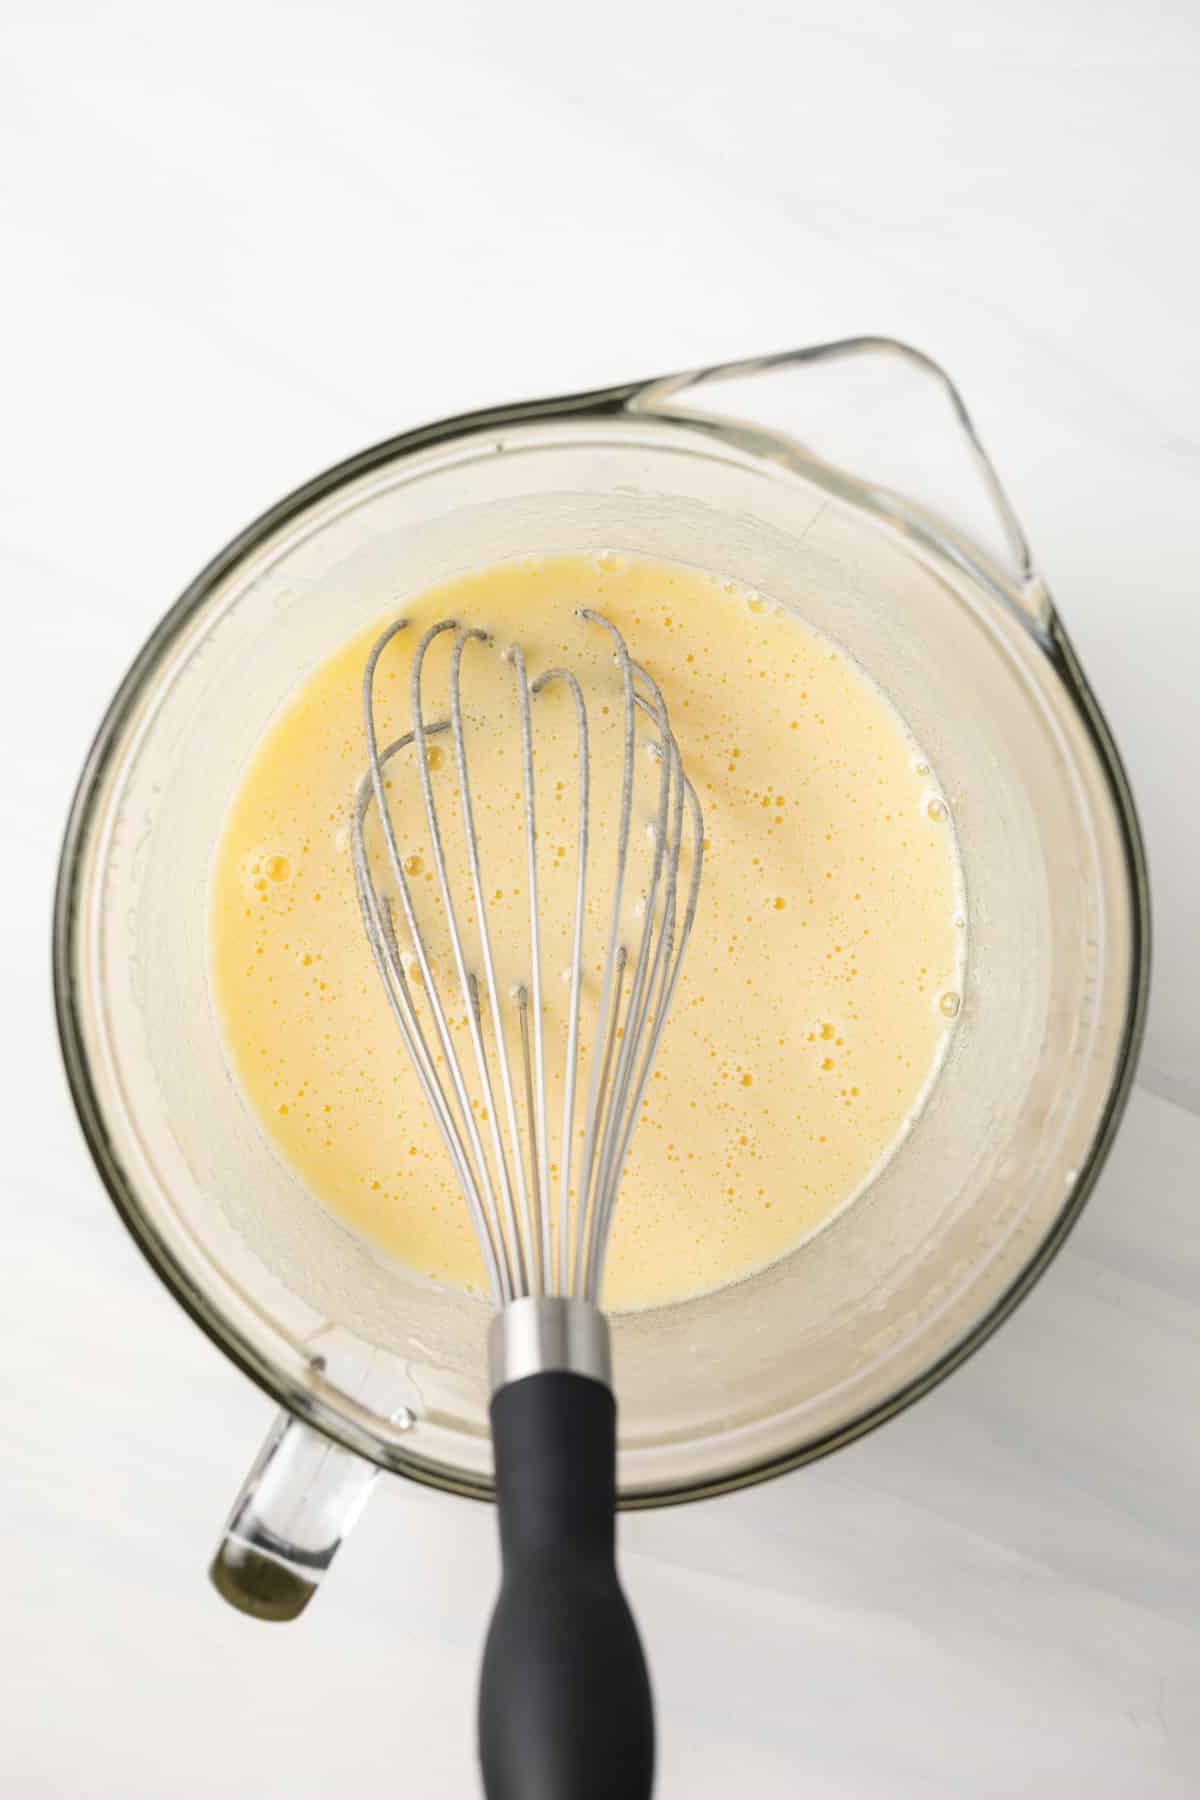 Eggs and sugar whisked in a glass bowl.